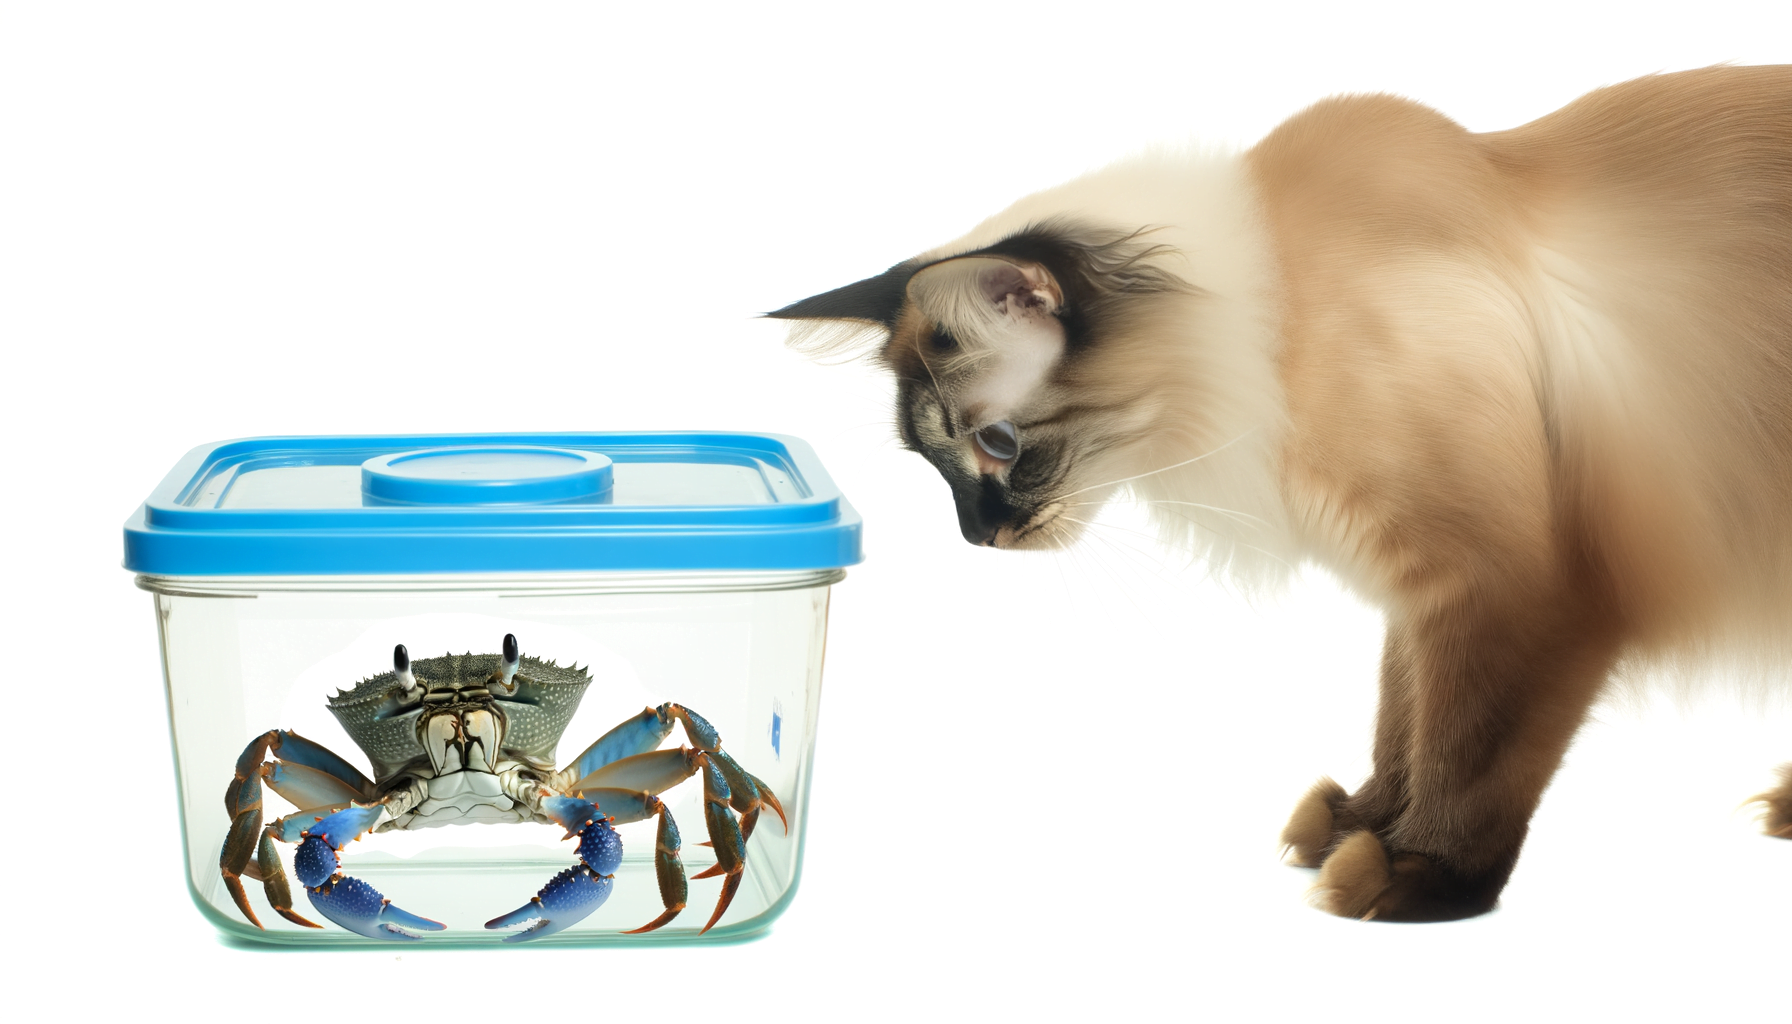 "Crustacean Conundrum: Can Cats Safely Dine on Crab?"